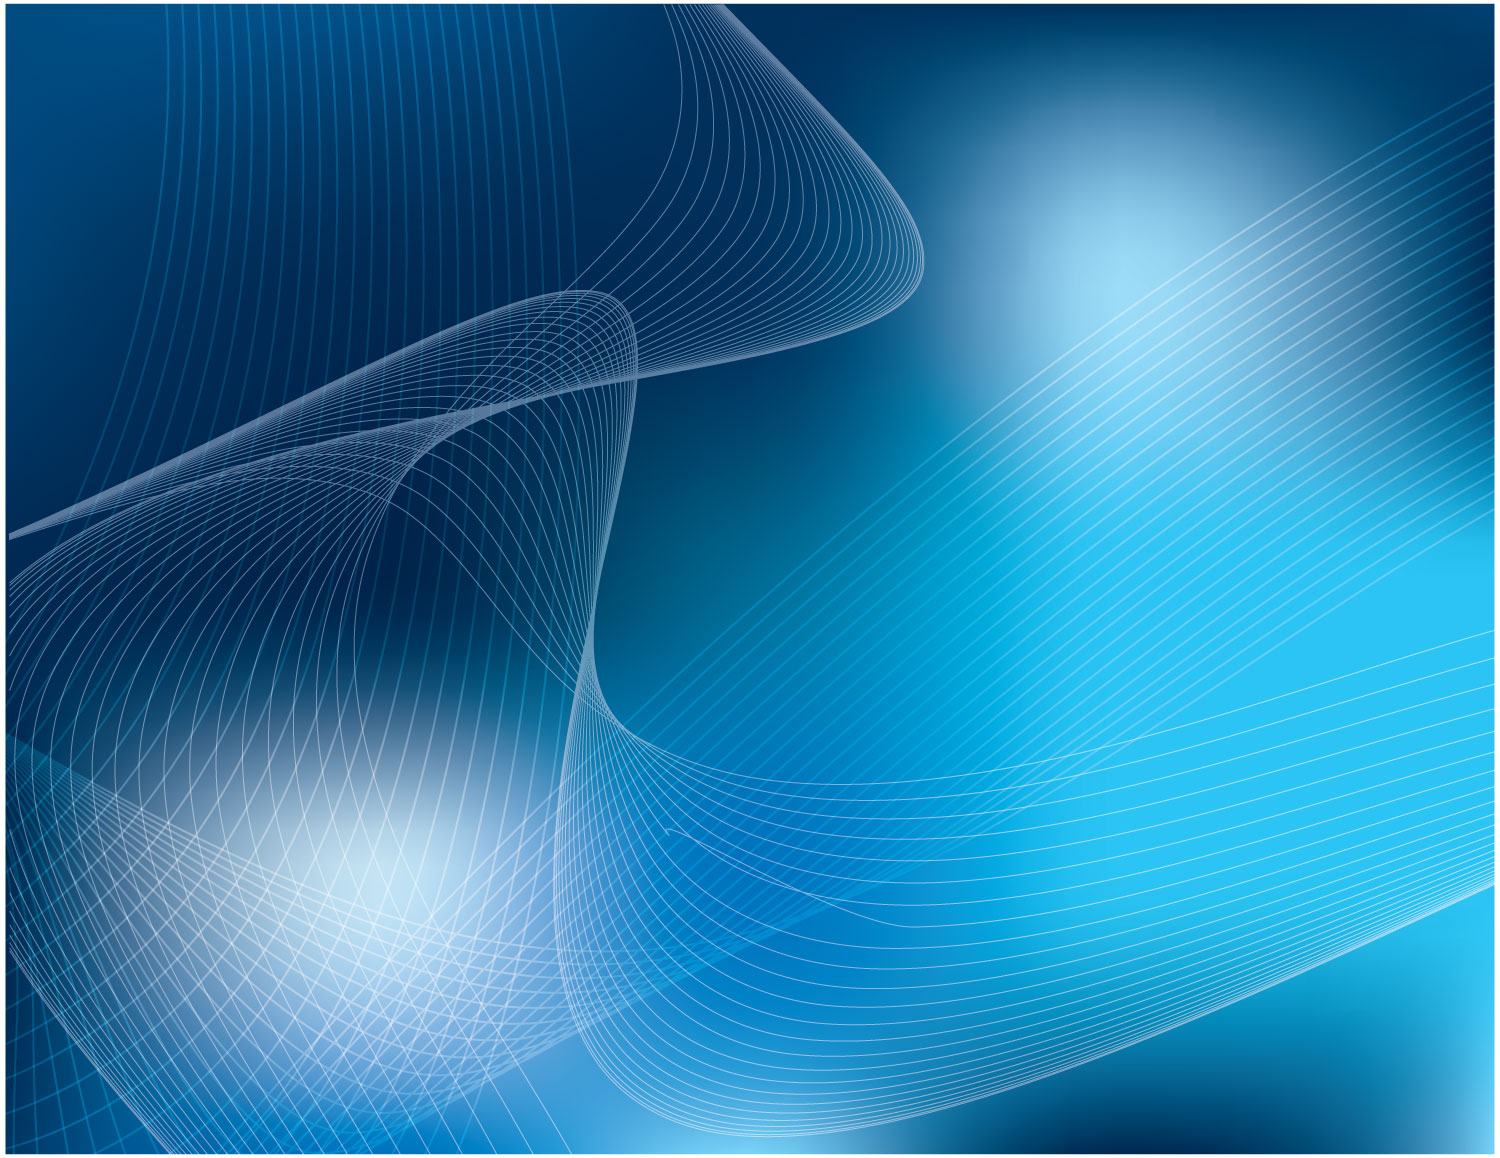 This is the Blue mesh abstract gradient background image You can use